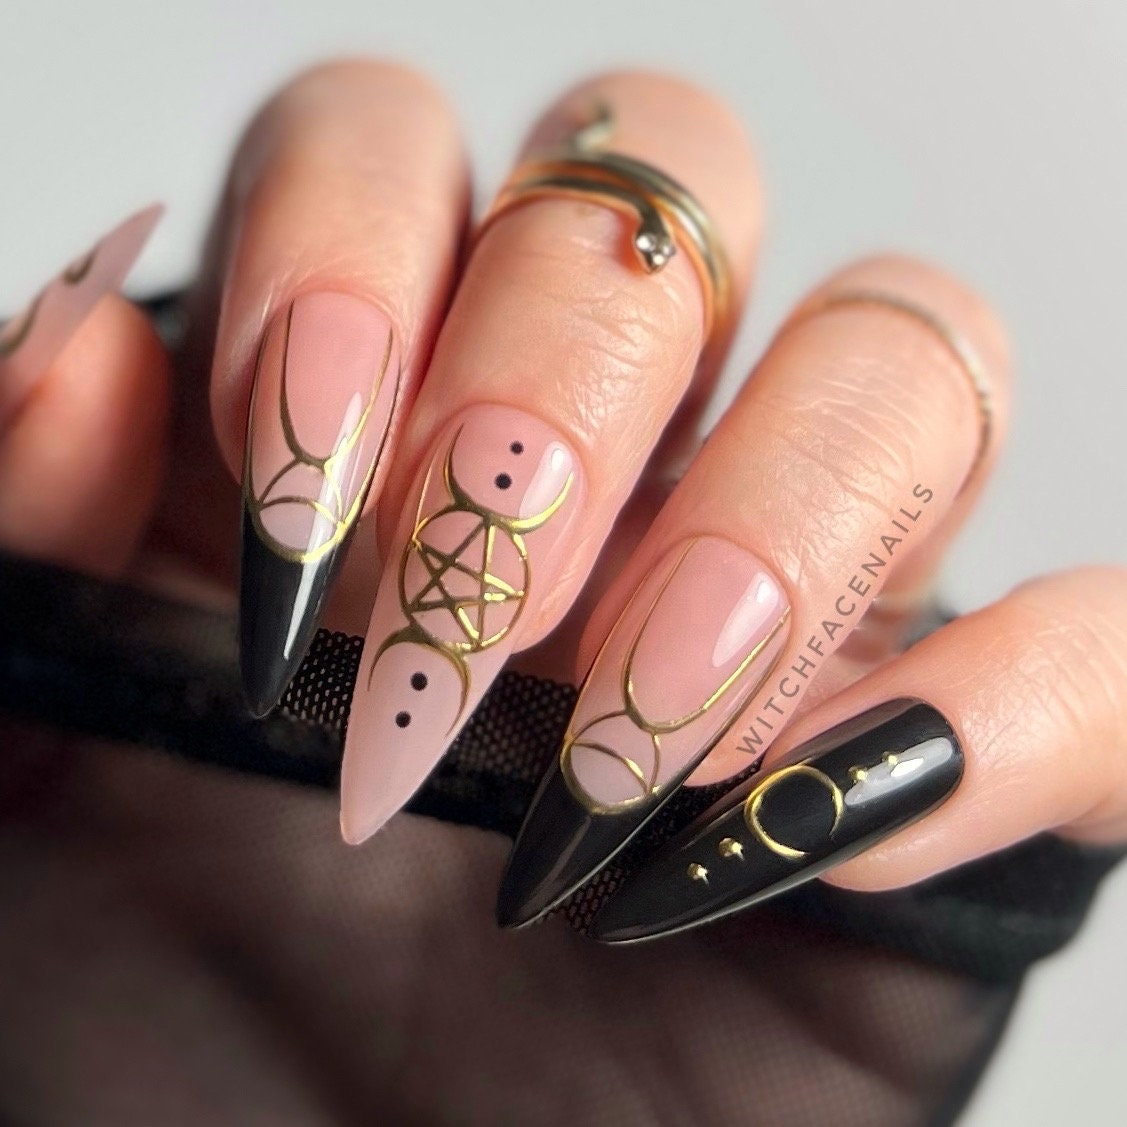 17 Black French Tip Nails Bring the Goth Back to Your Manis